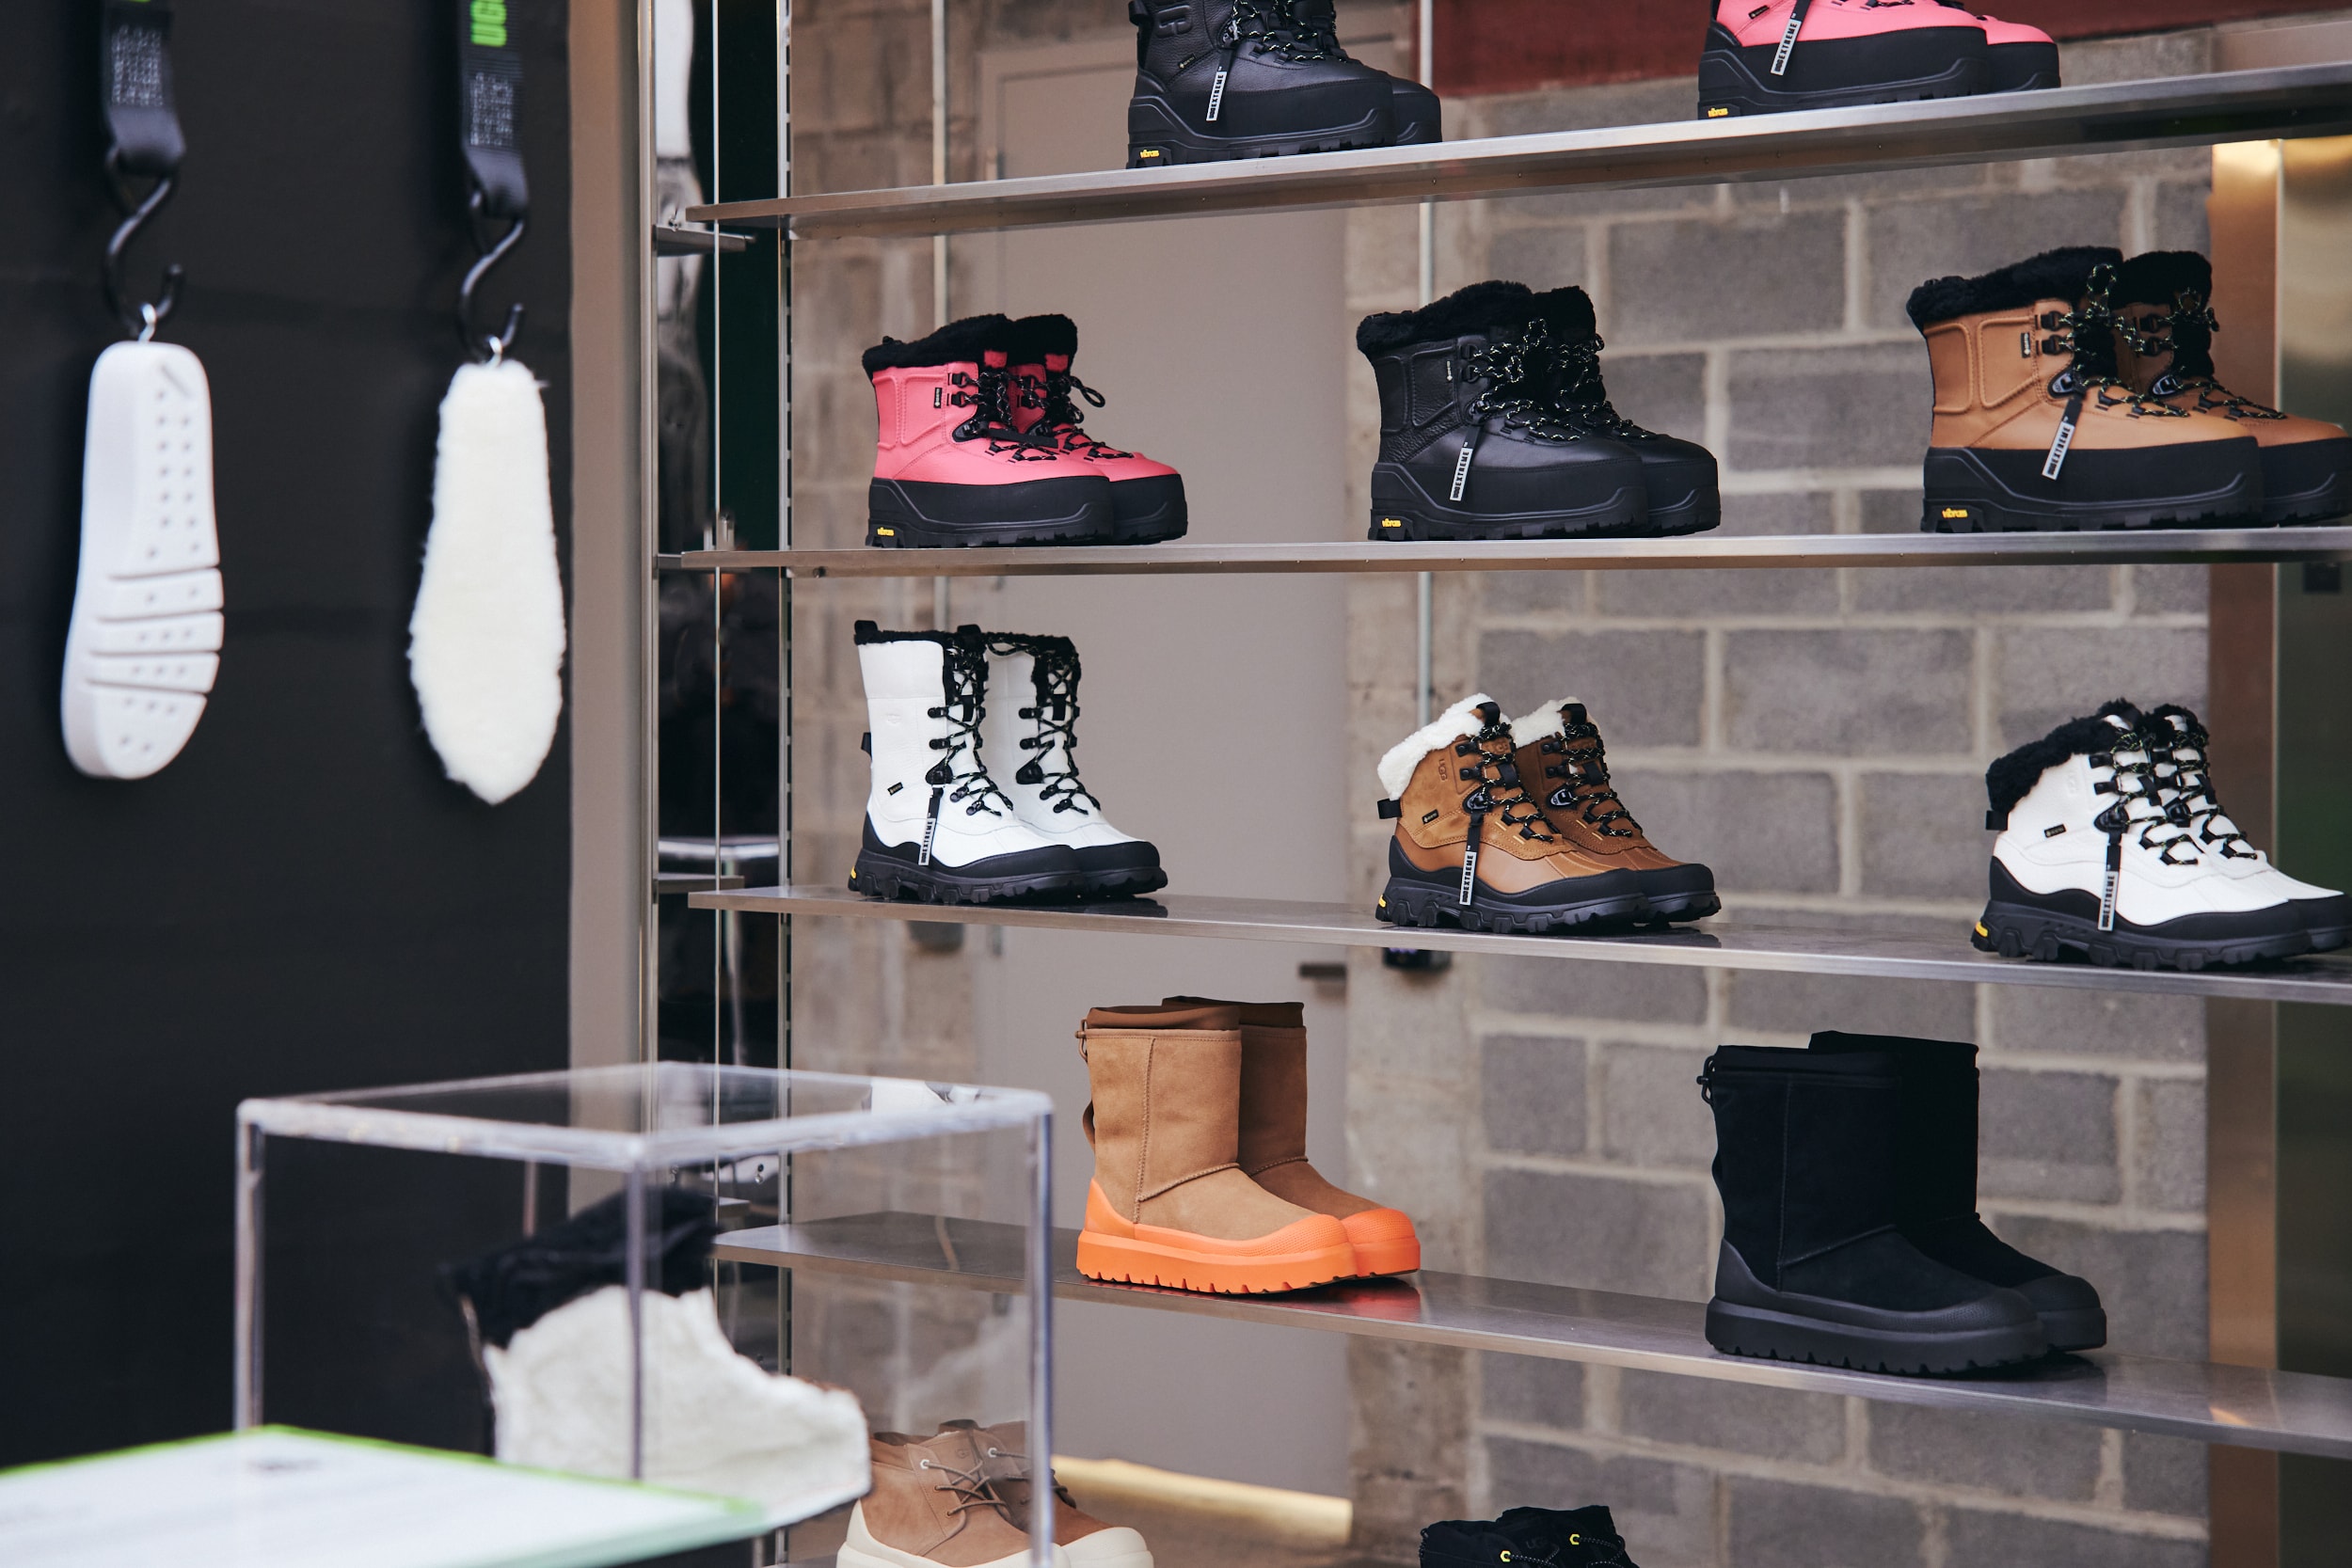 ugg feel house hbx new york closer look uggextreme collection lower east side chinatown release winter 